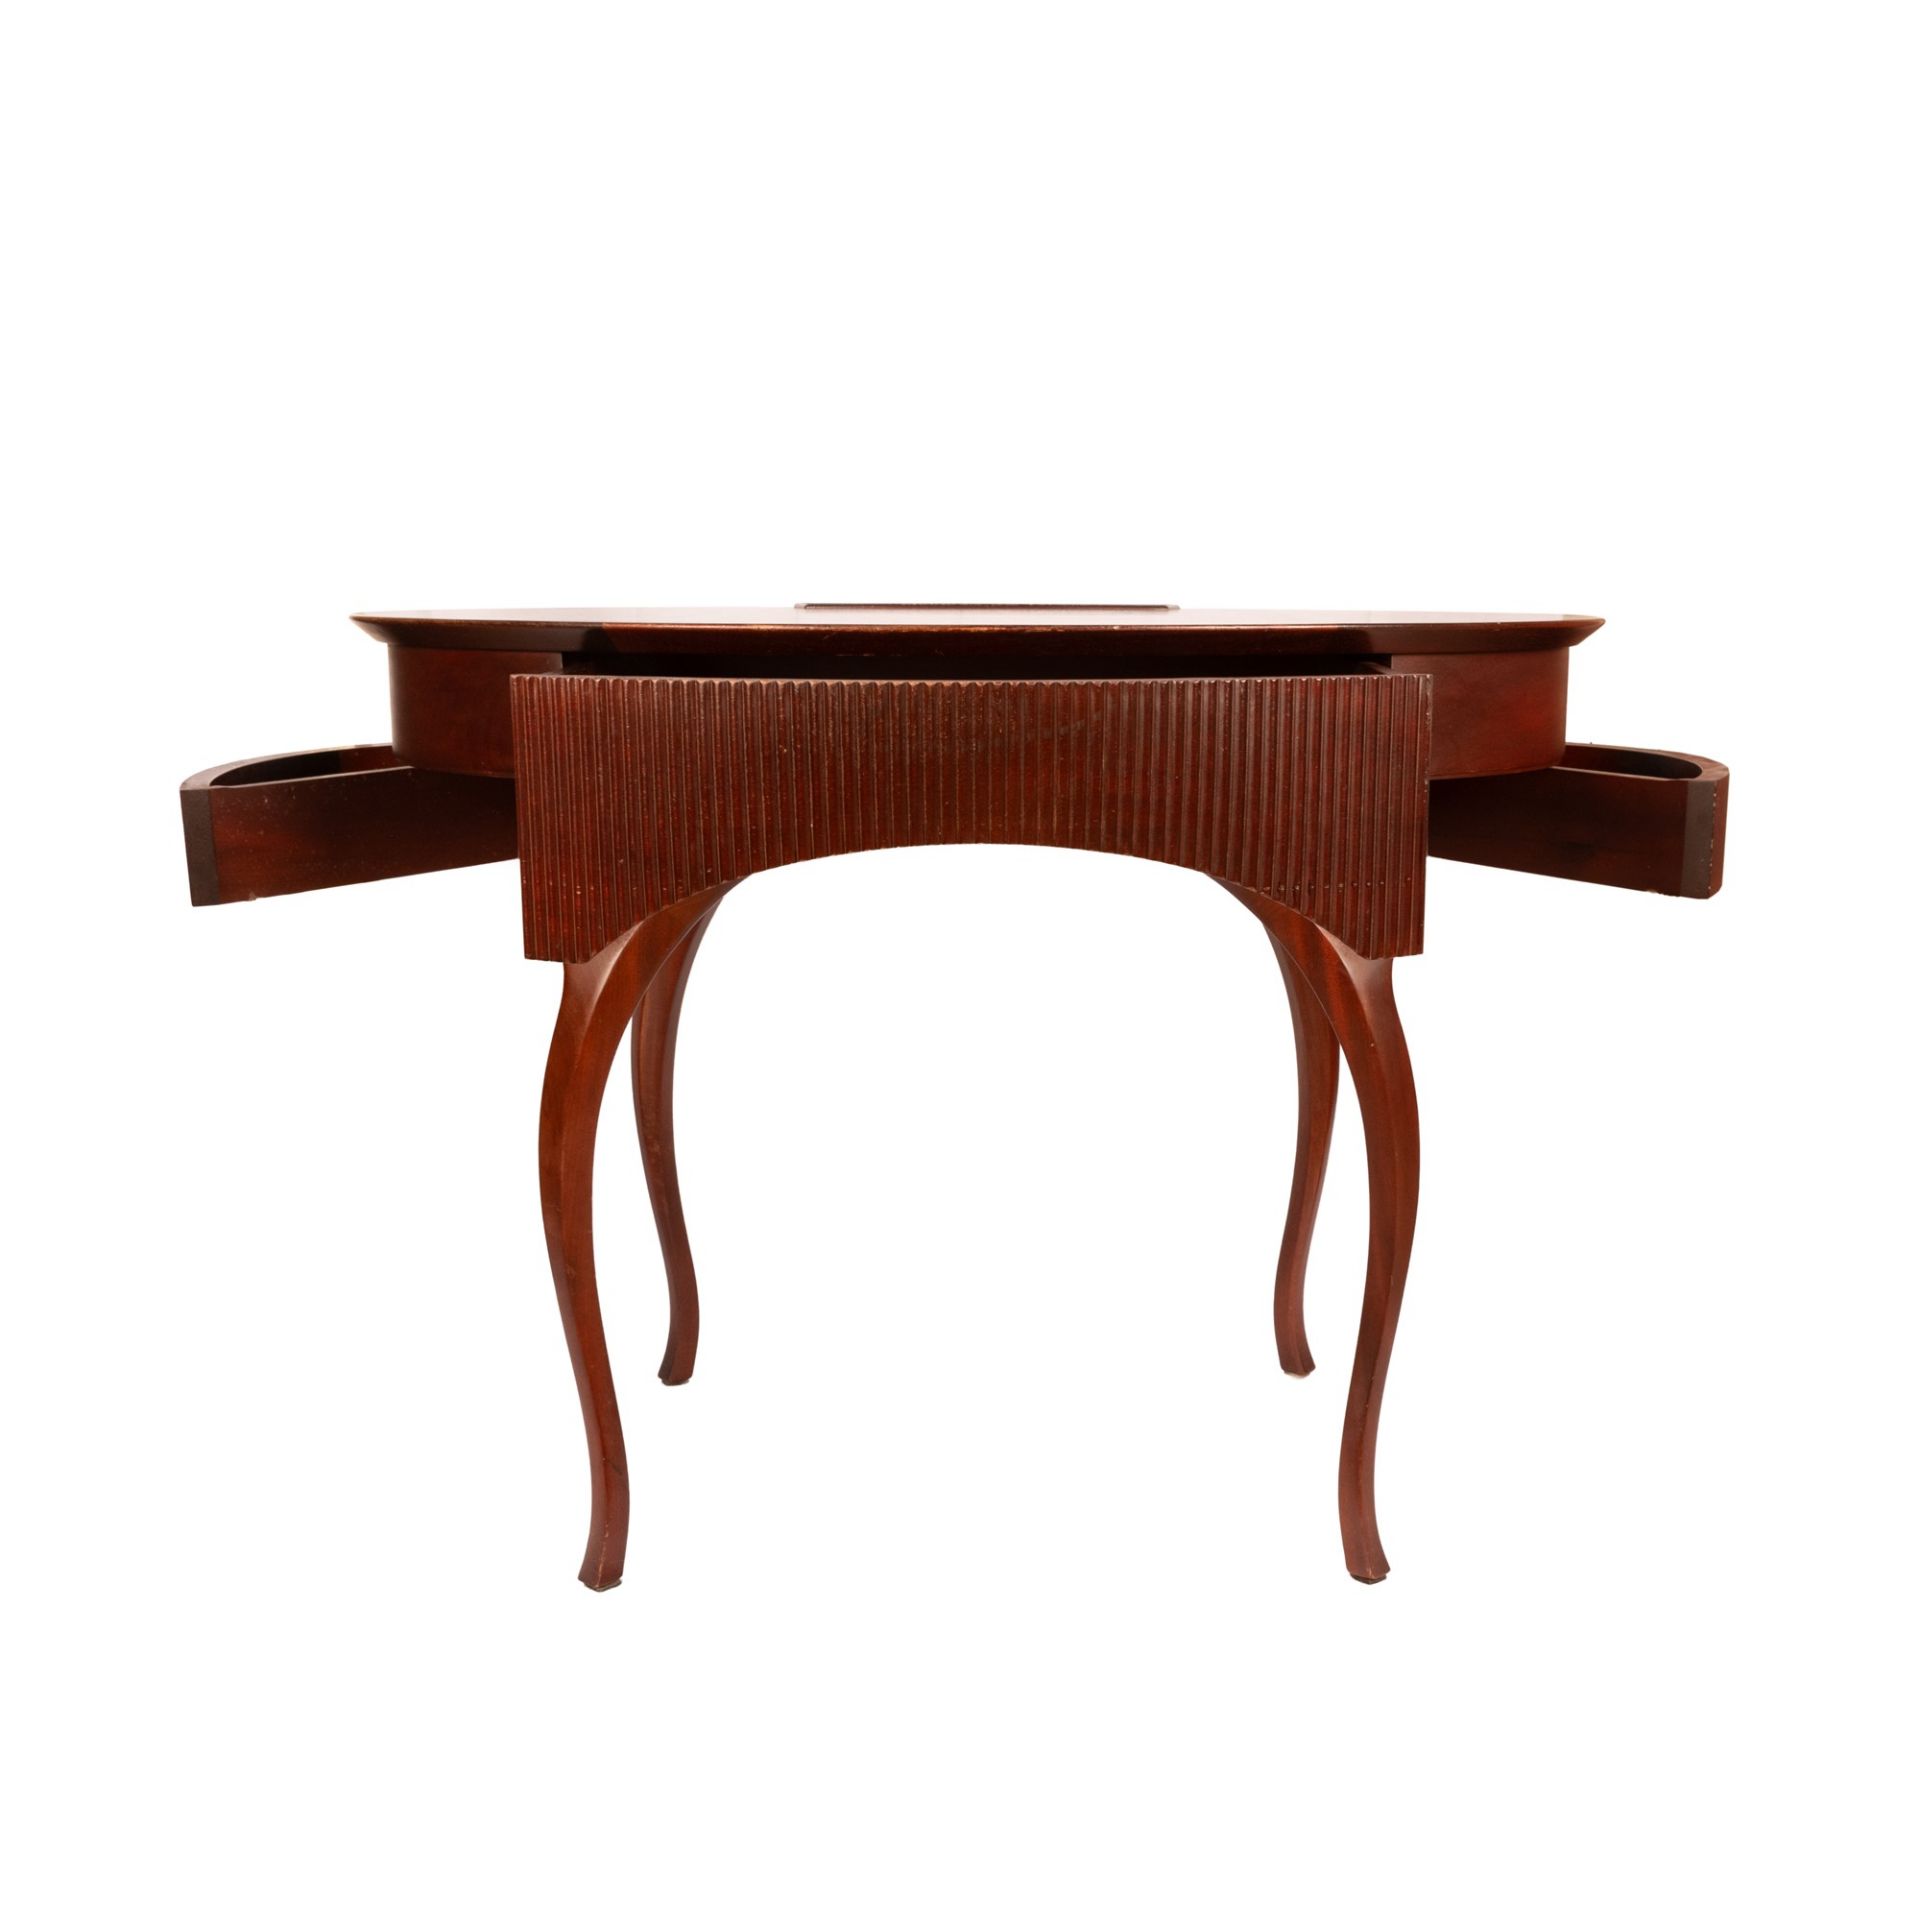 Writing desk in cherry wood - Image 10 of 25